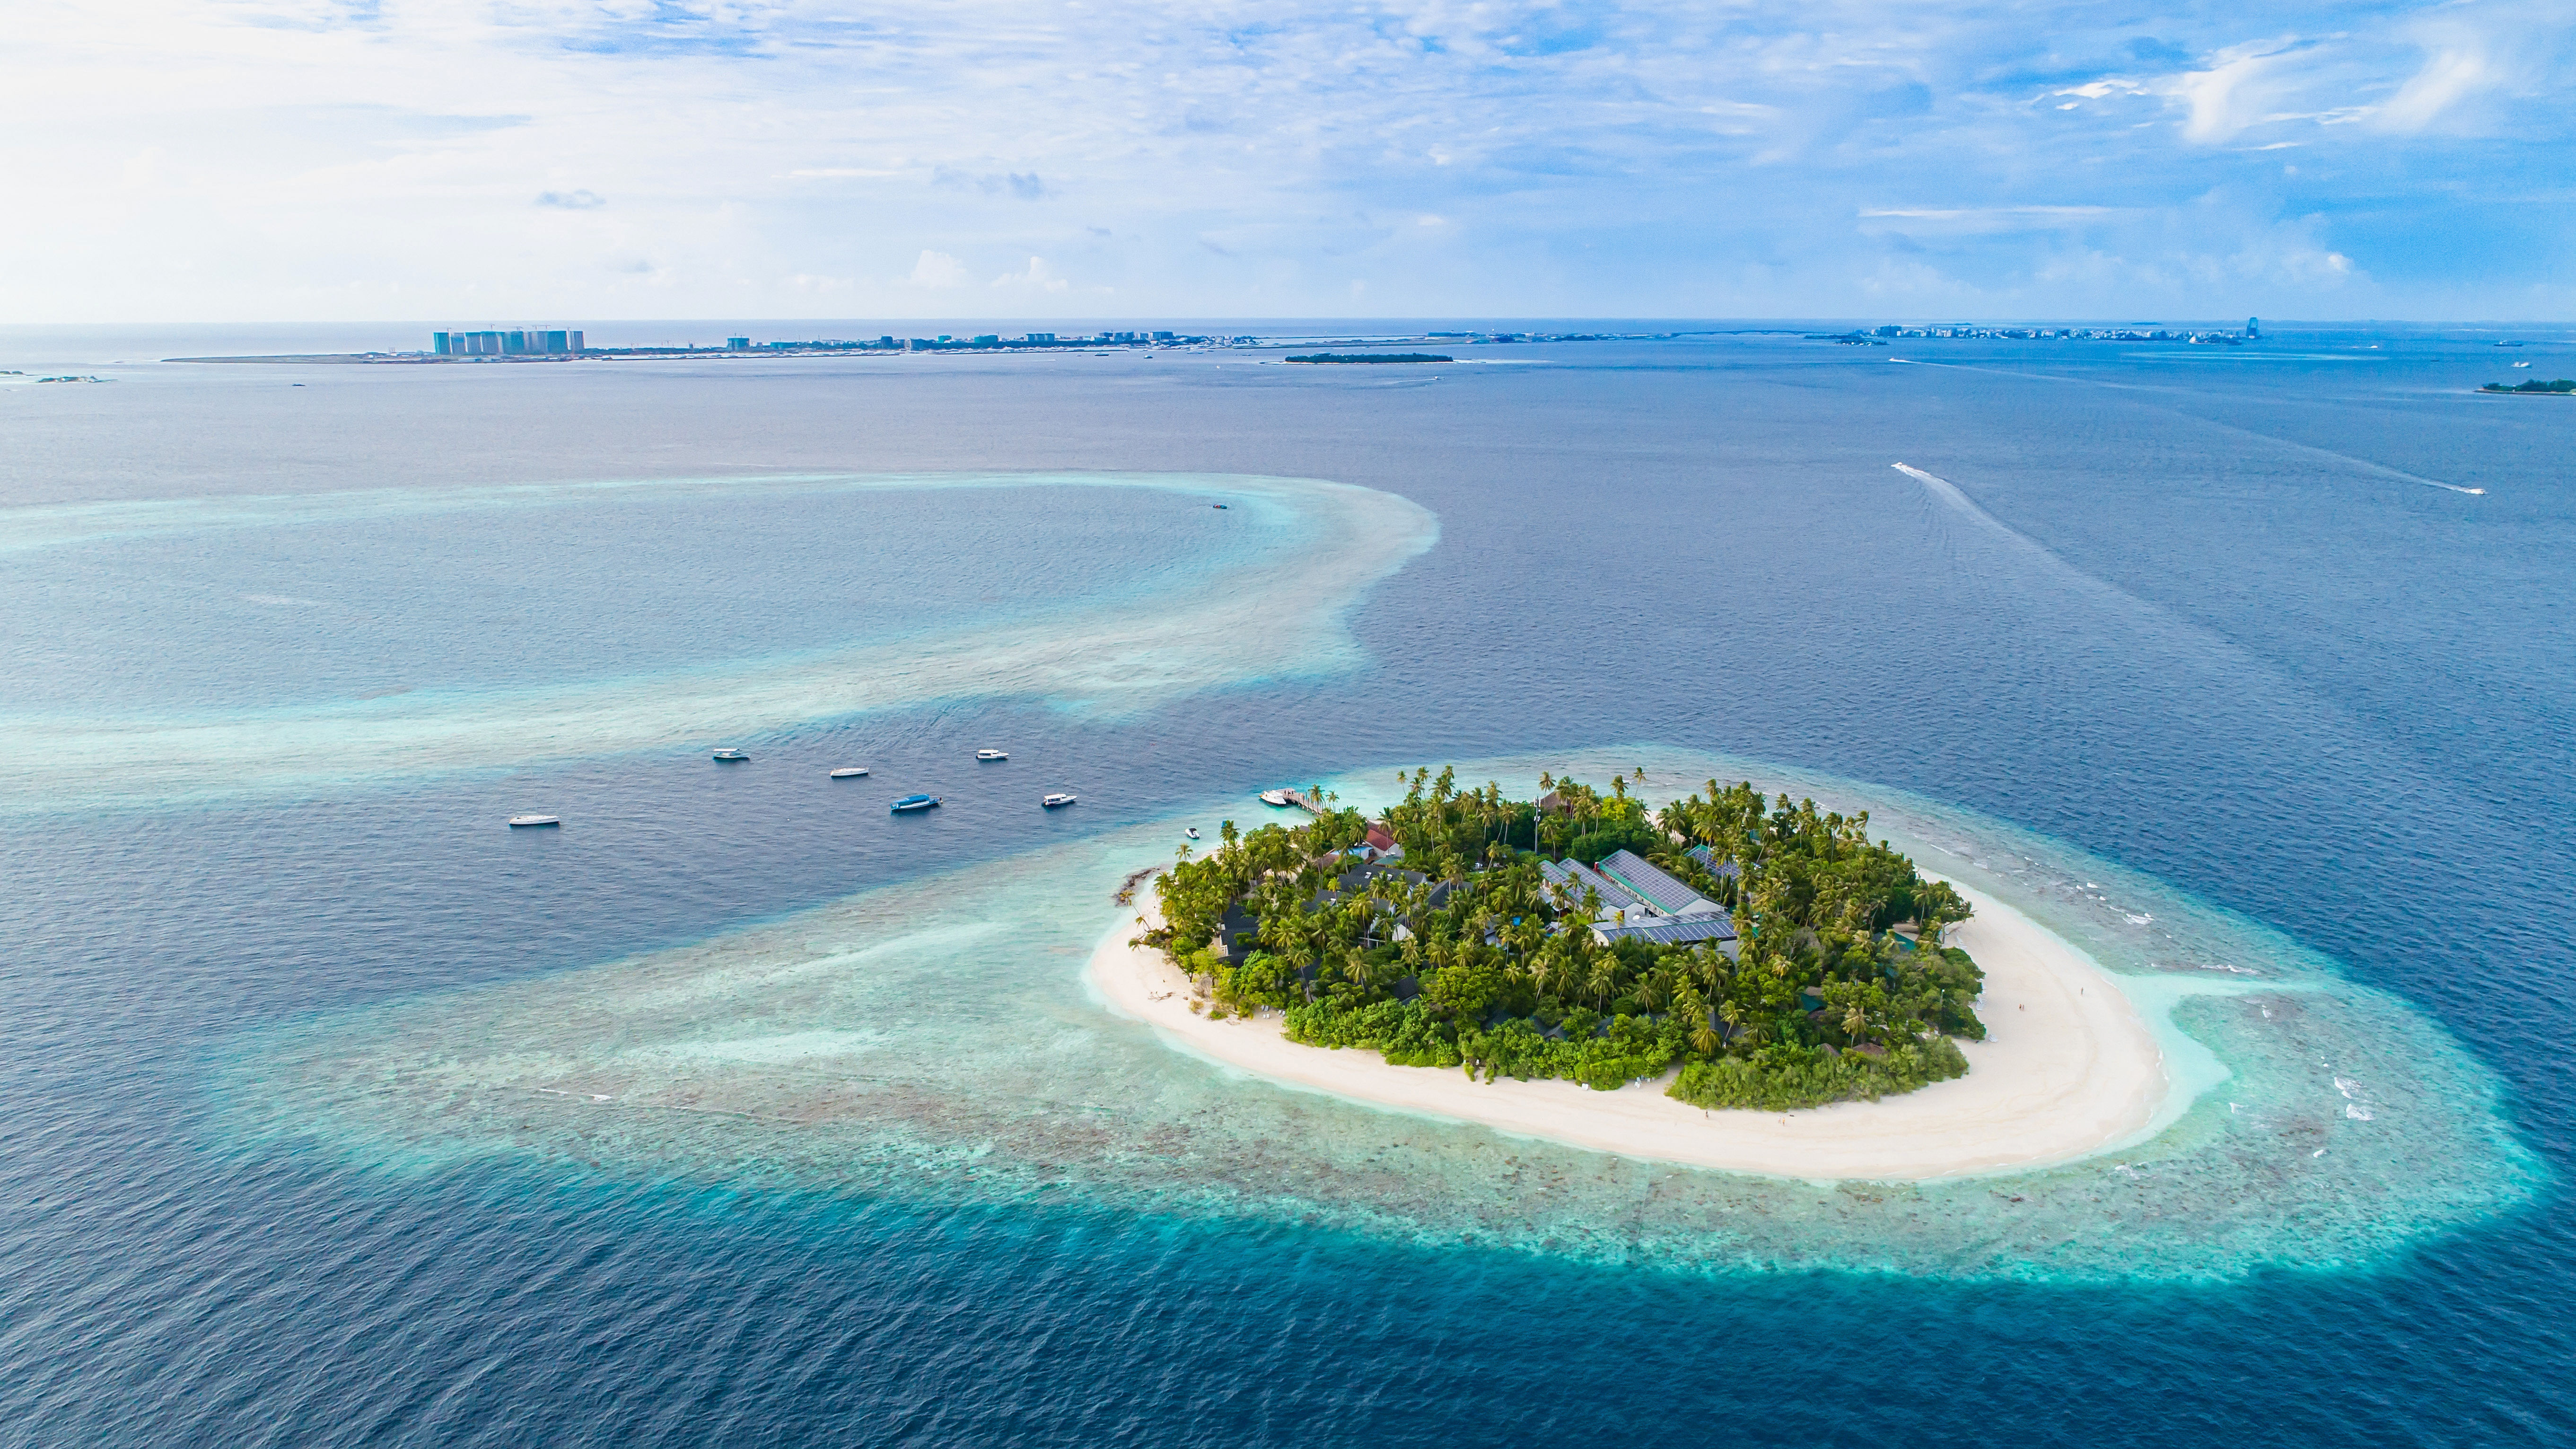 Aerial drone view of Maldives atoll island with resort, tropical green trees, shallow reefs and aqua blue waters. 